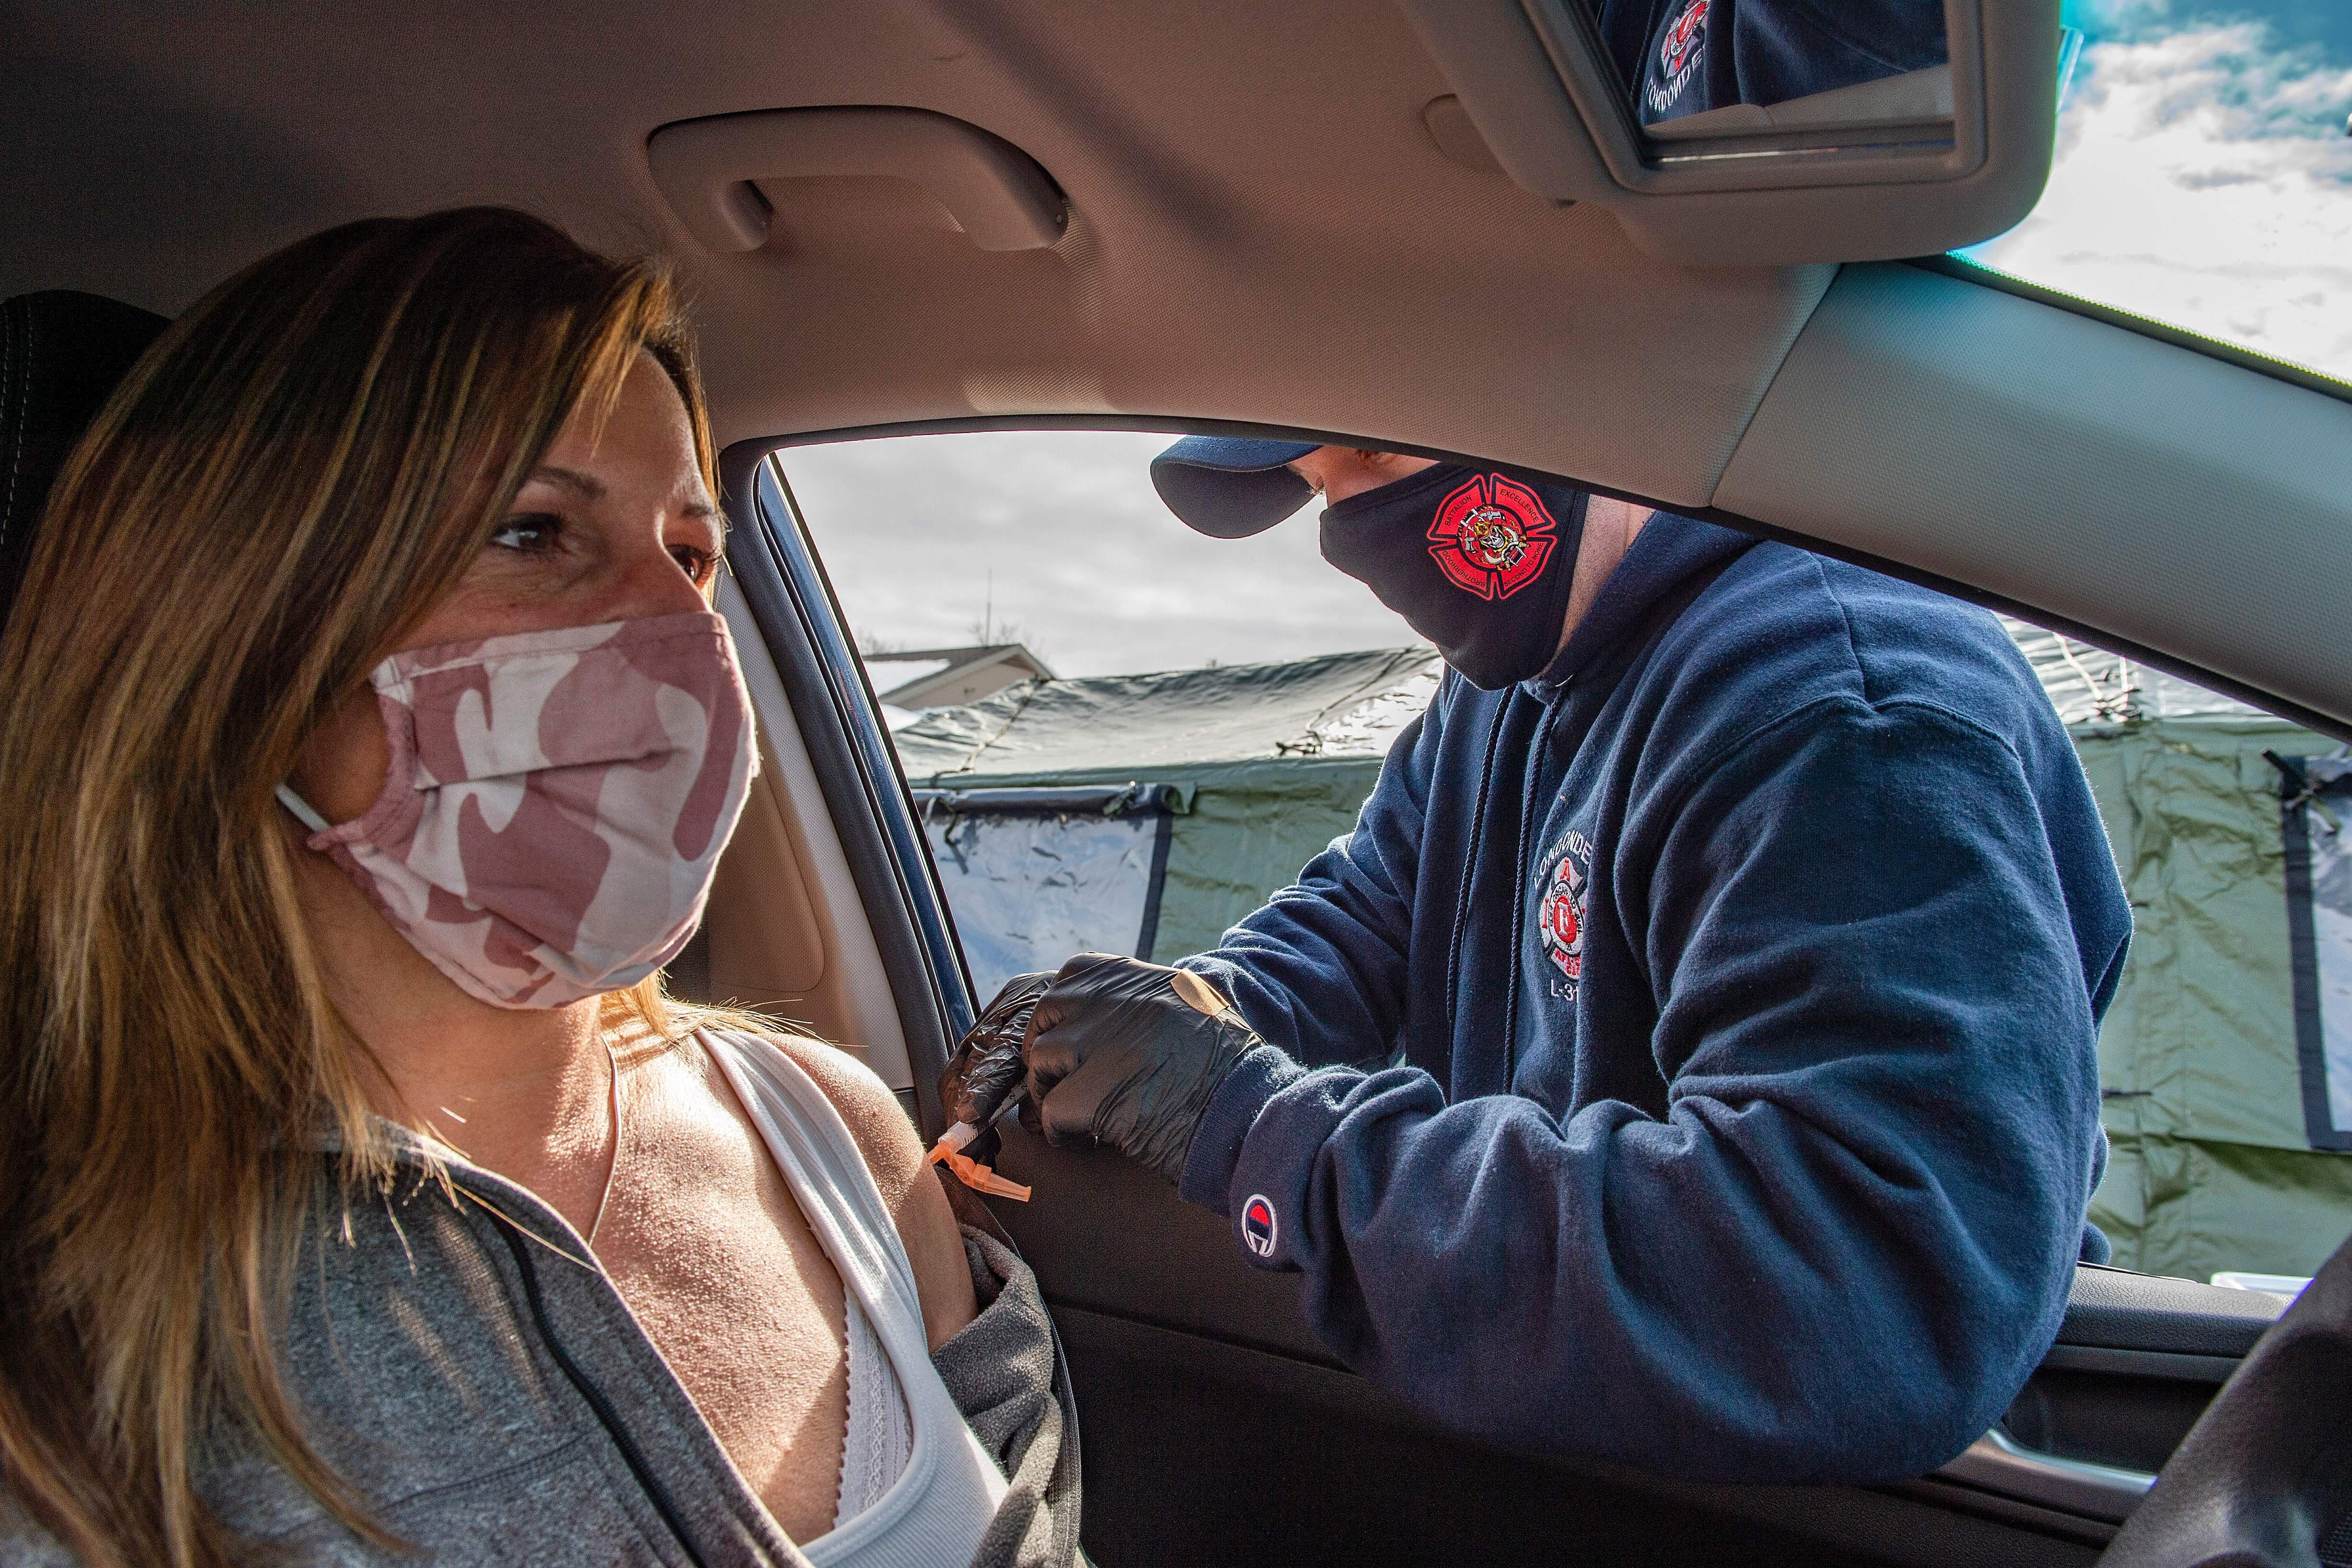 A first responder vaccinates a woman through the window of her car.